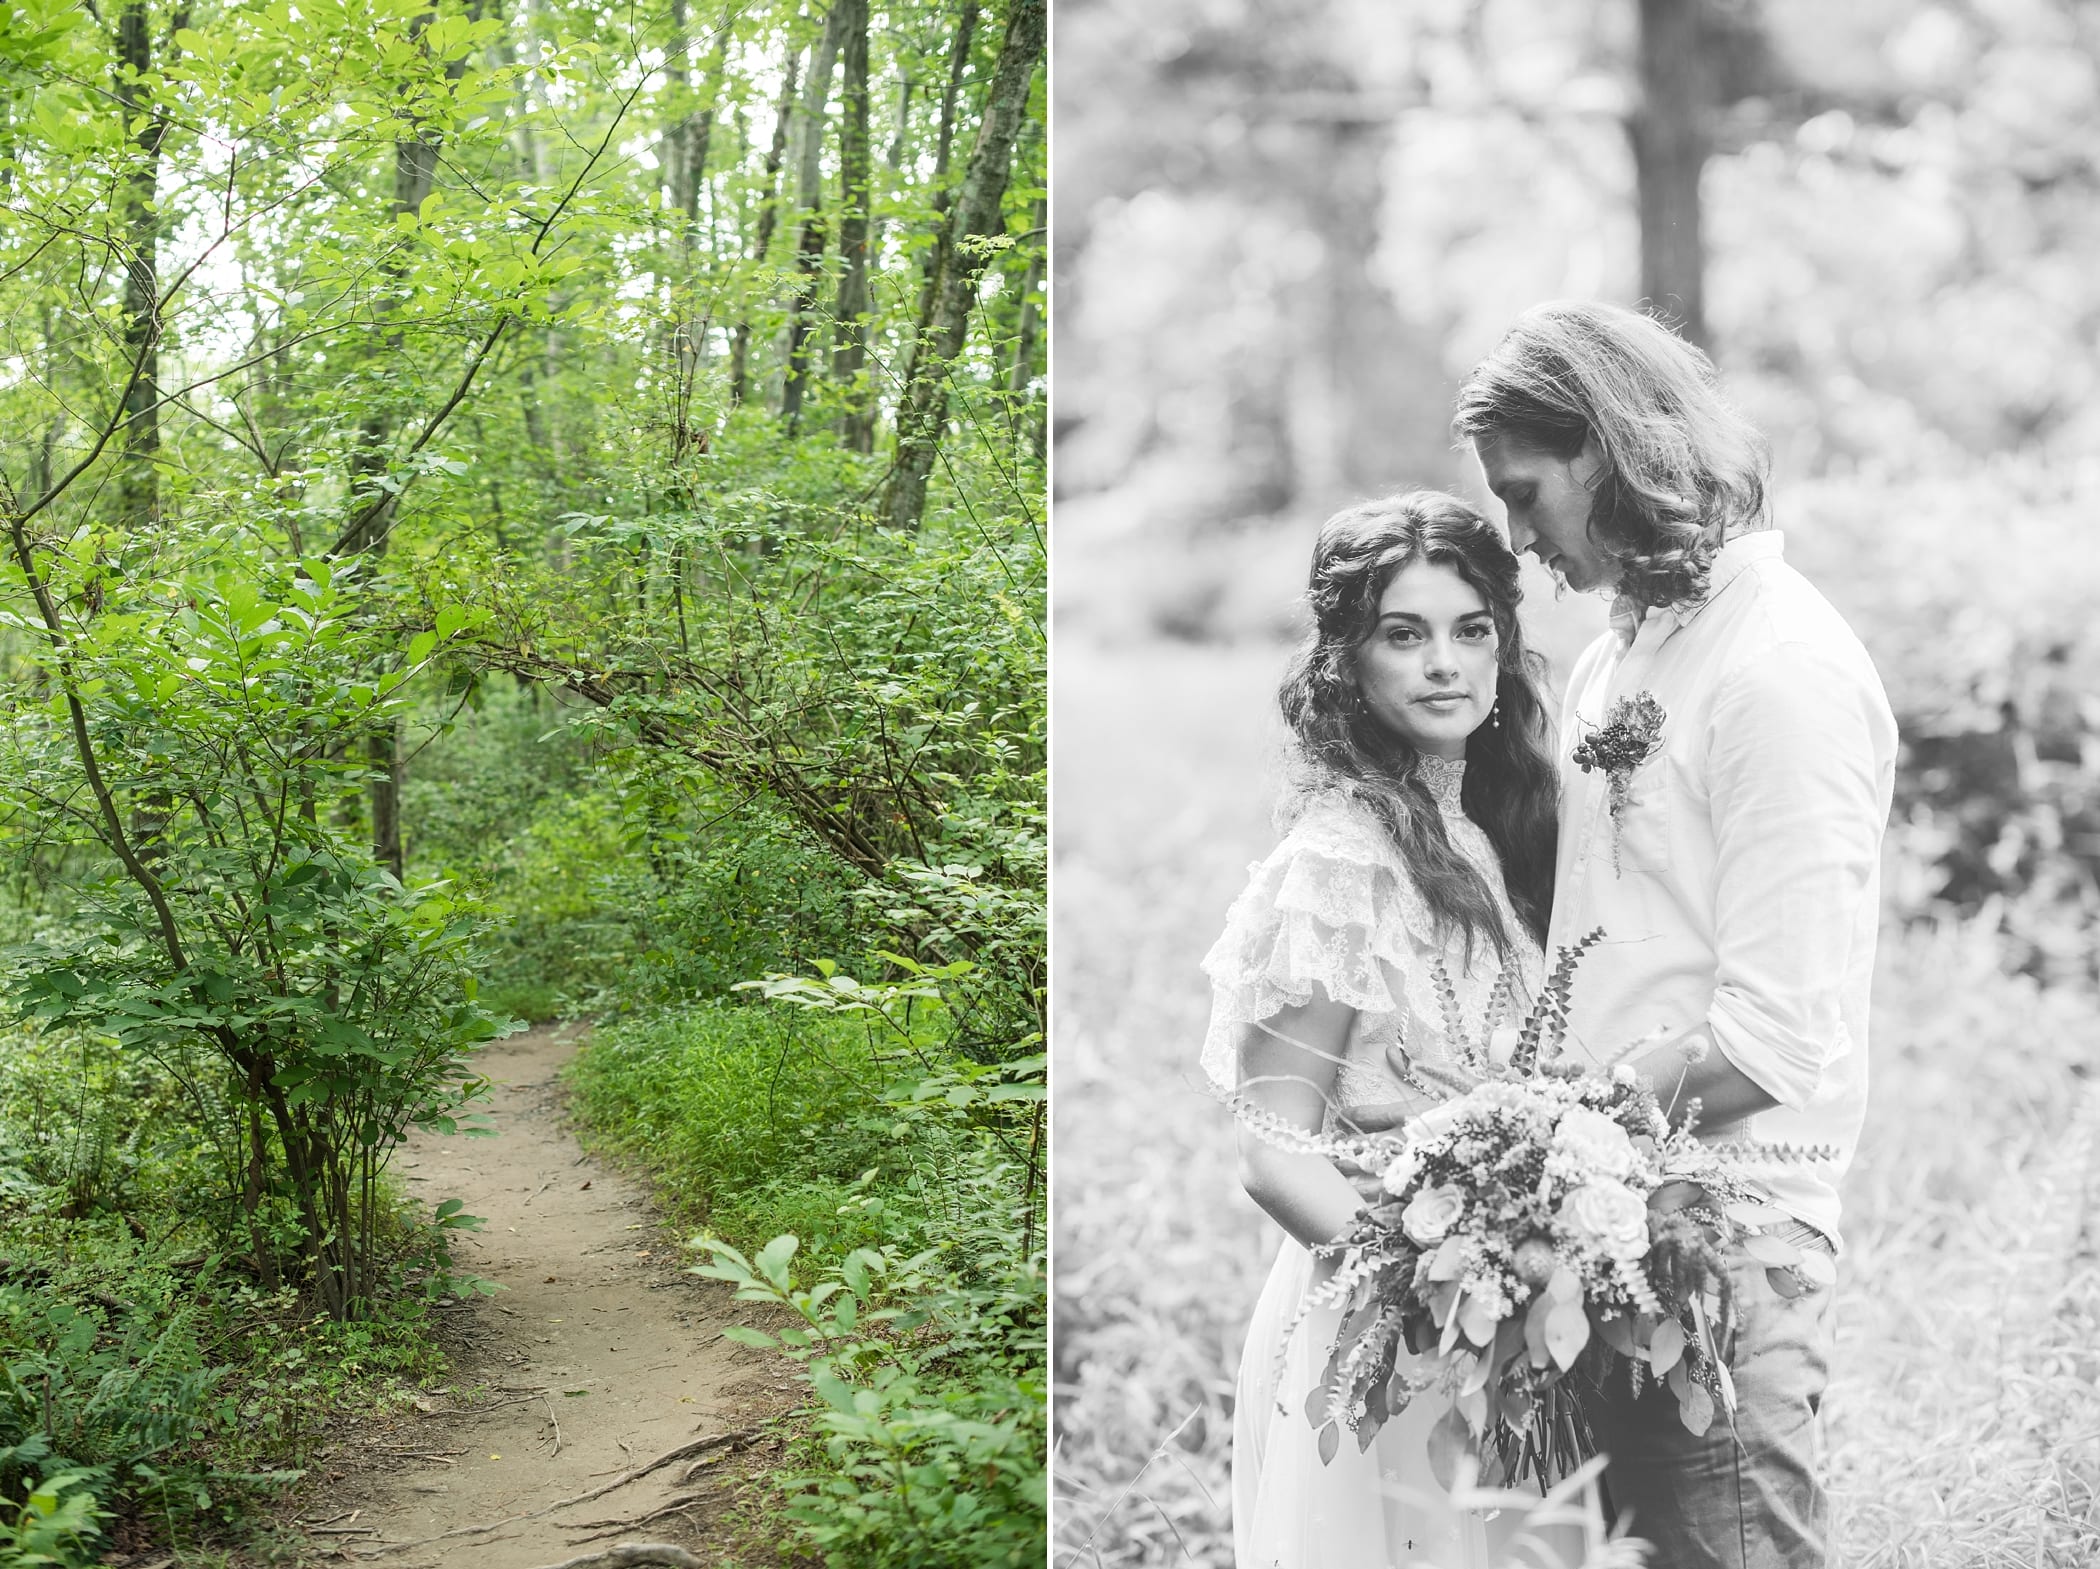 Tuck Everlasting Styled Wedding by Michelle & Logan